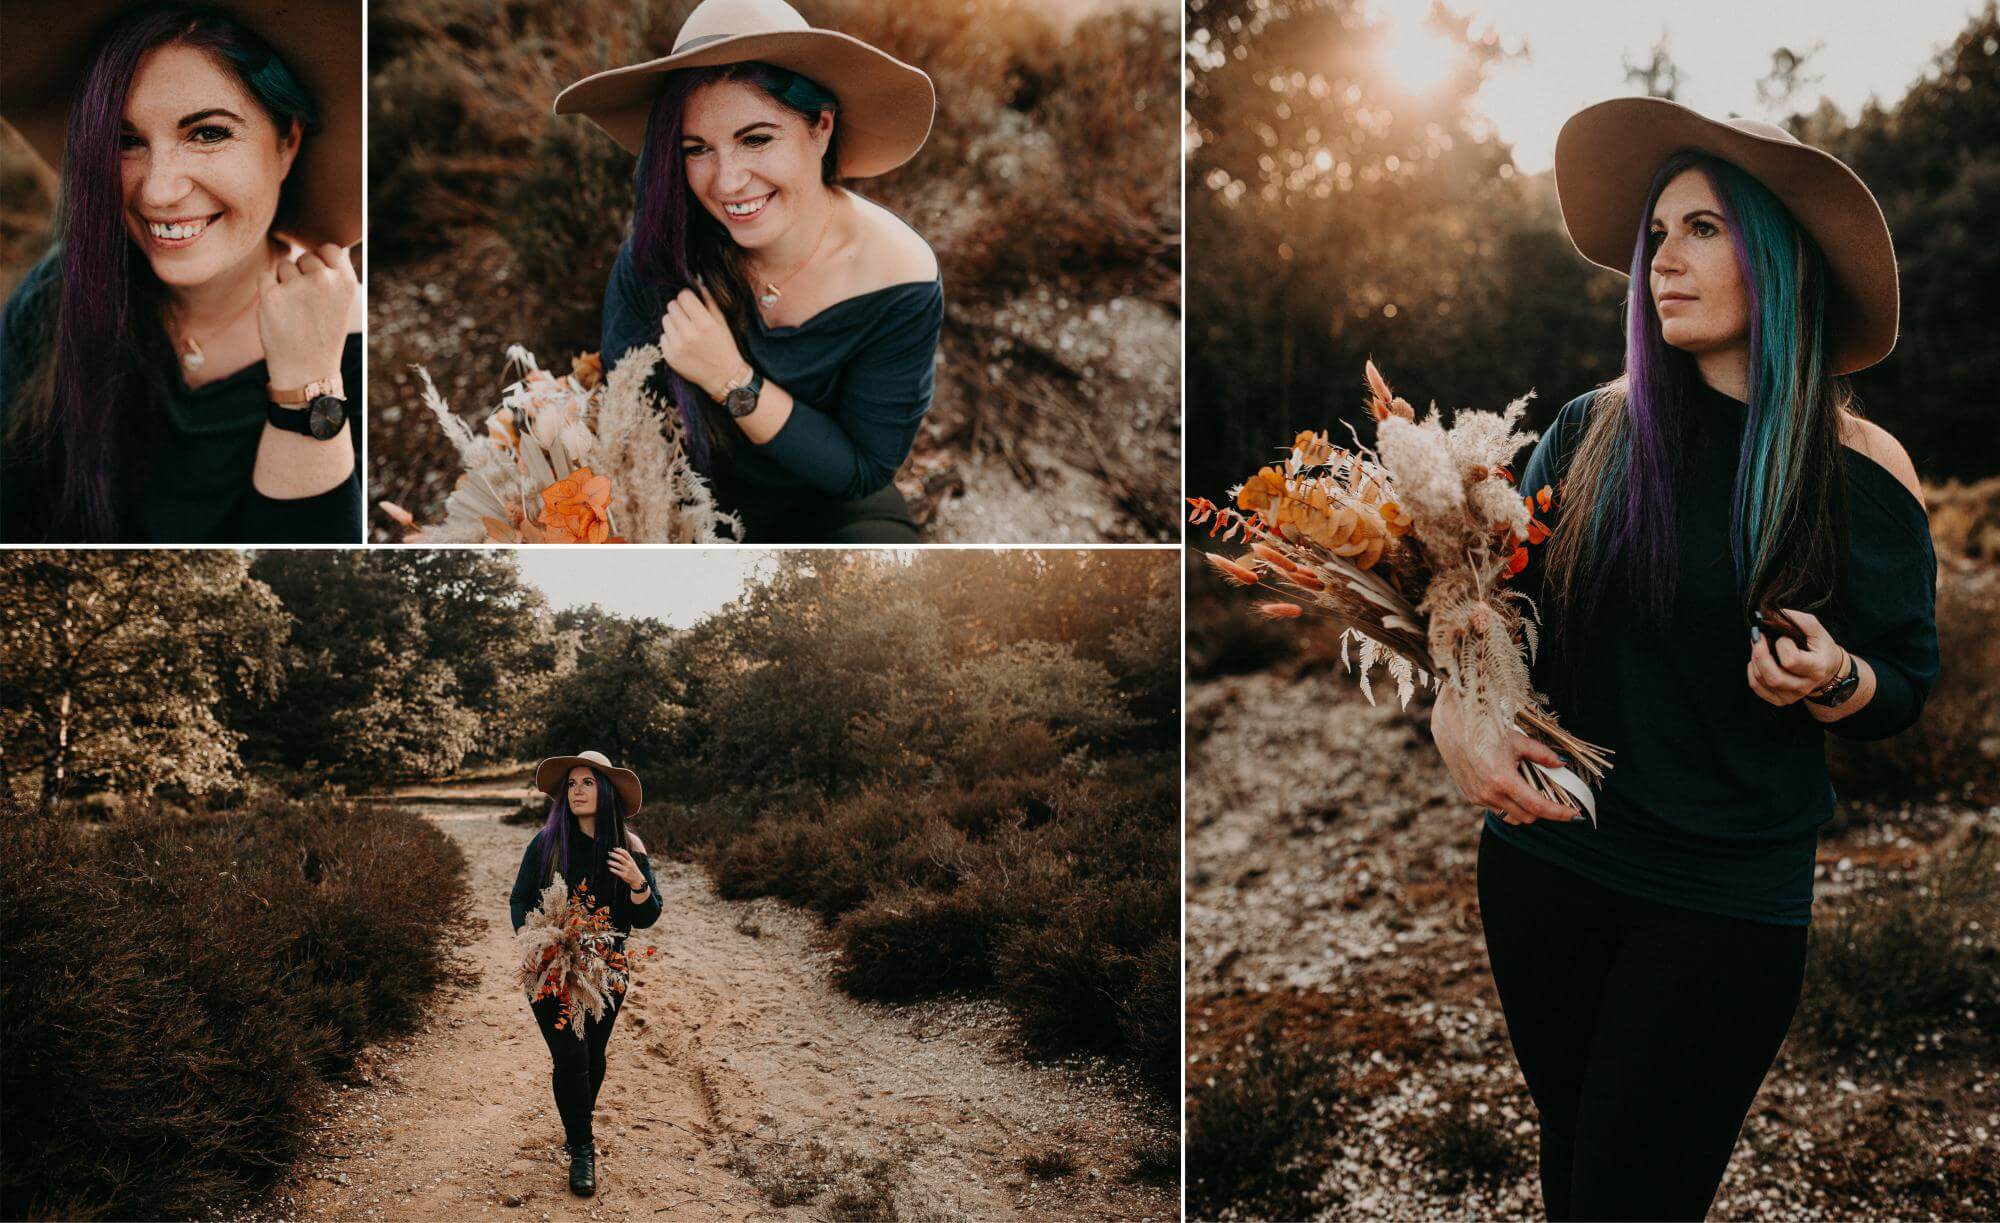 Portraits of the wedding photographer Yvonne Lehmann, who poses with a beige hat and loose violet-turquoise long hair and a bouquet of flowers in the heathland.